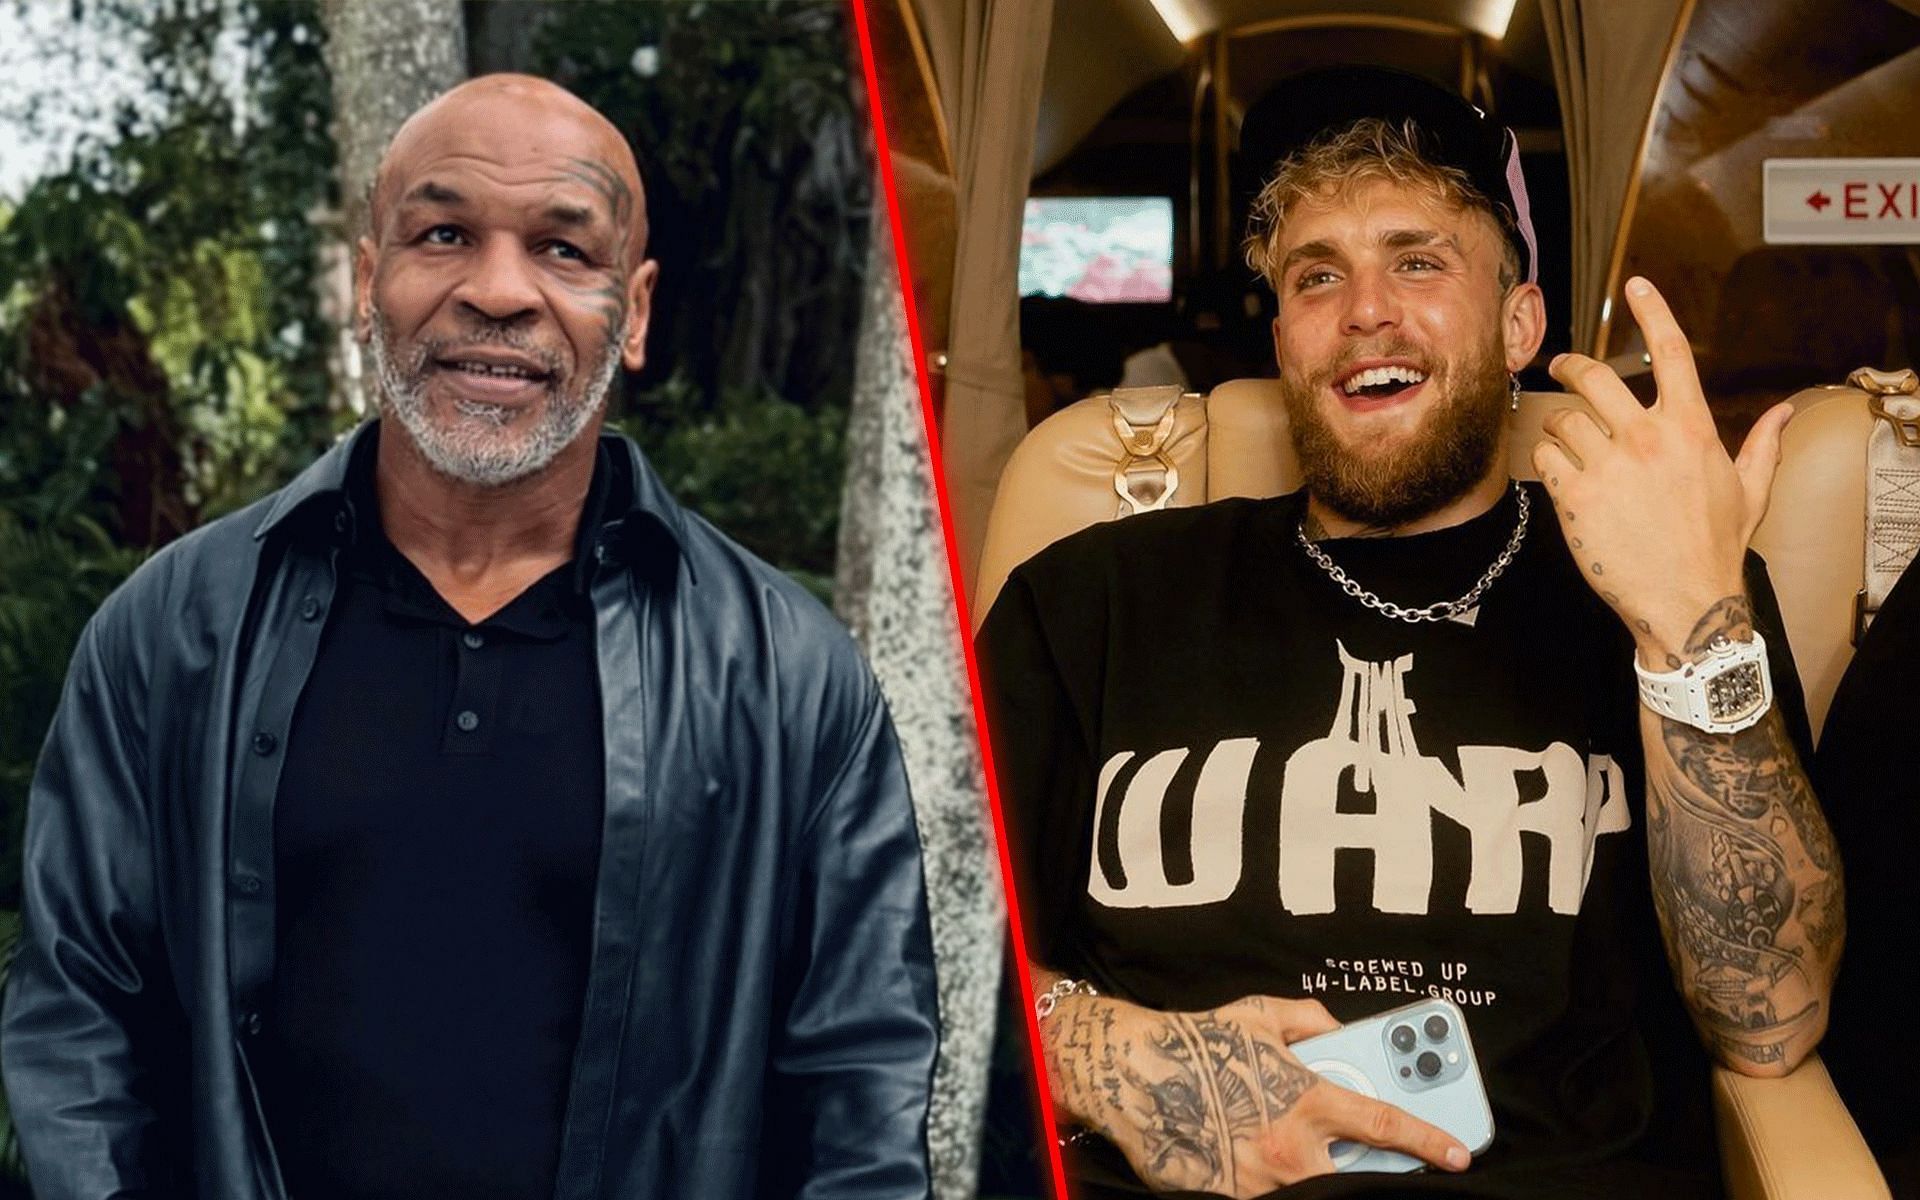 Mike Tyson (left) will return to the professional boxing ring after almost two decades, as he clashes with YouTuber Jake Paul (right) [Images courtesy: @miketyson and @jakepaul on Instagram]